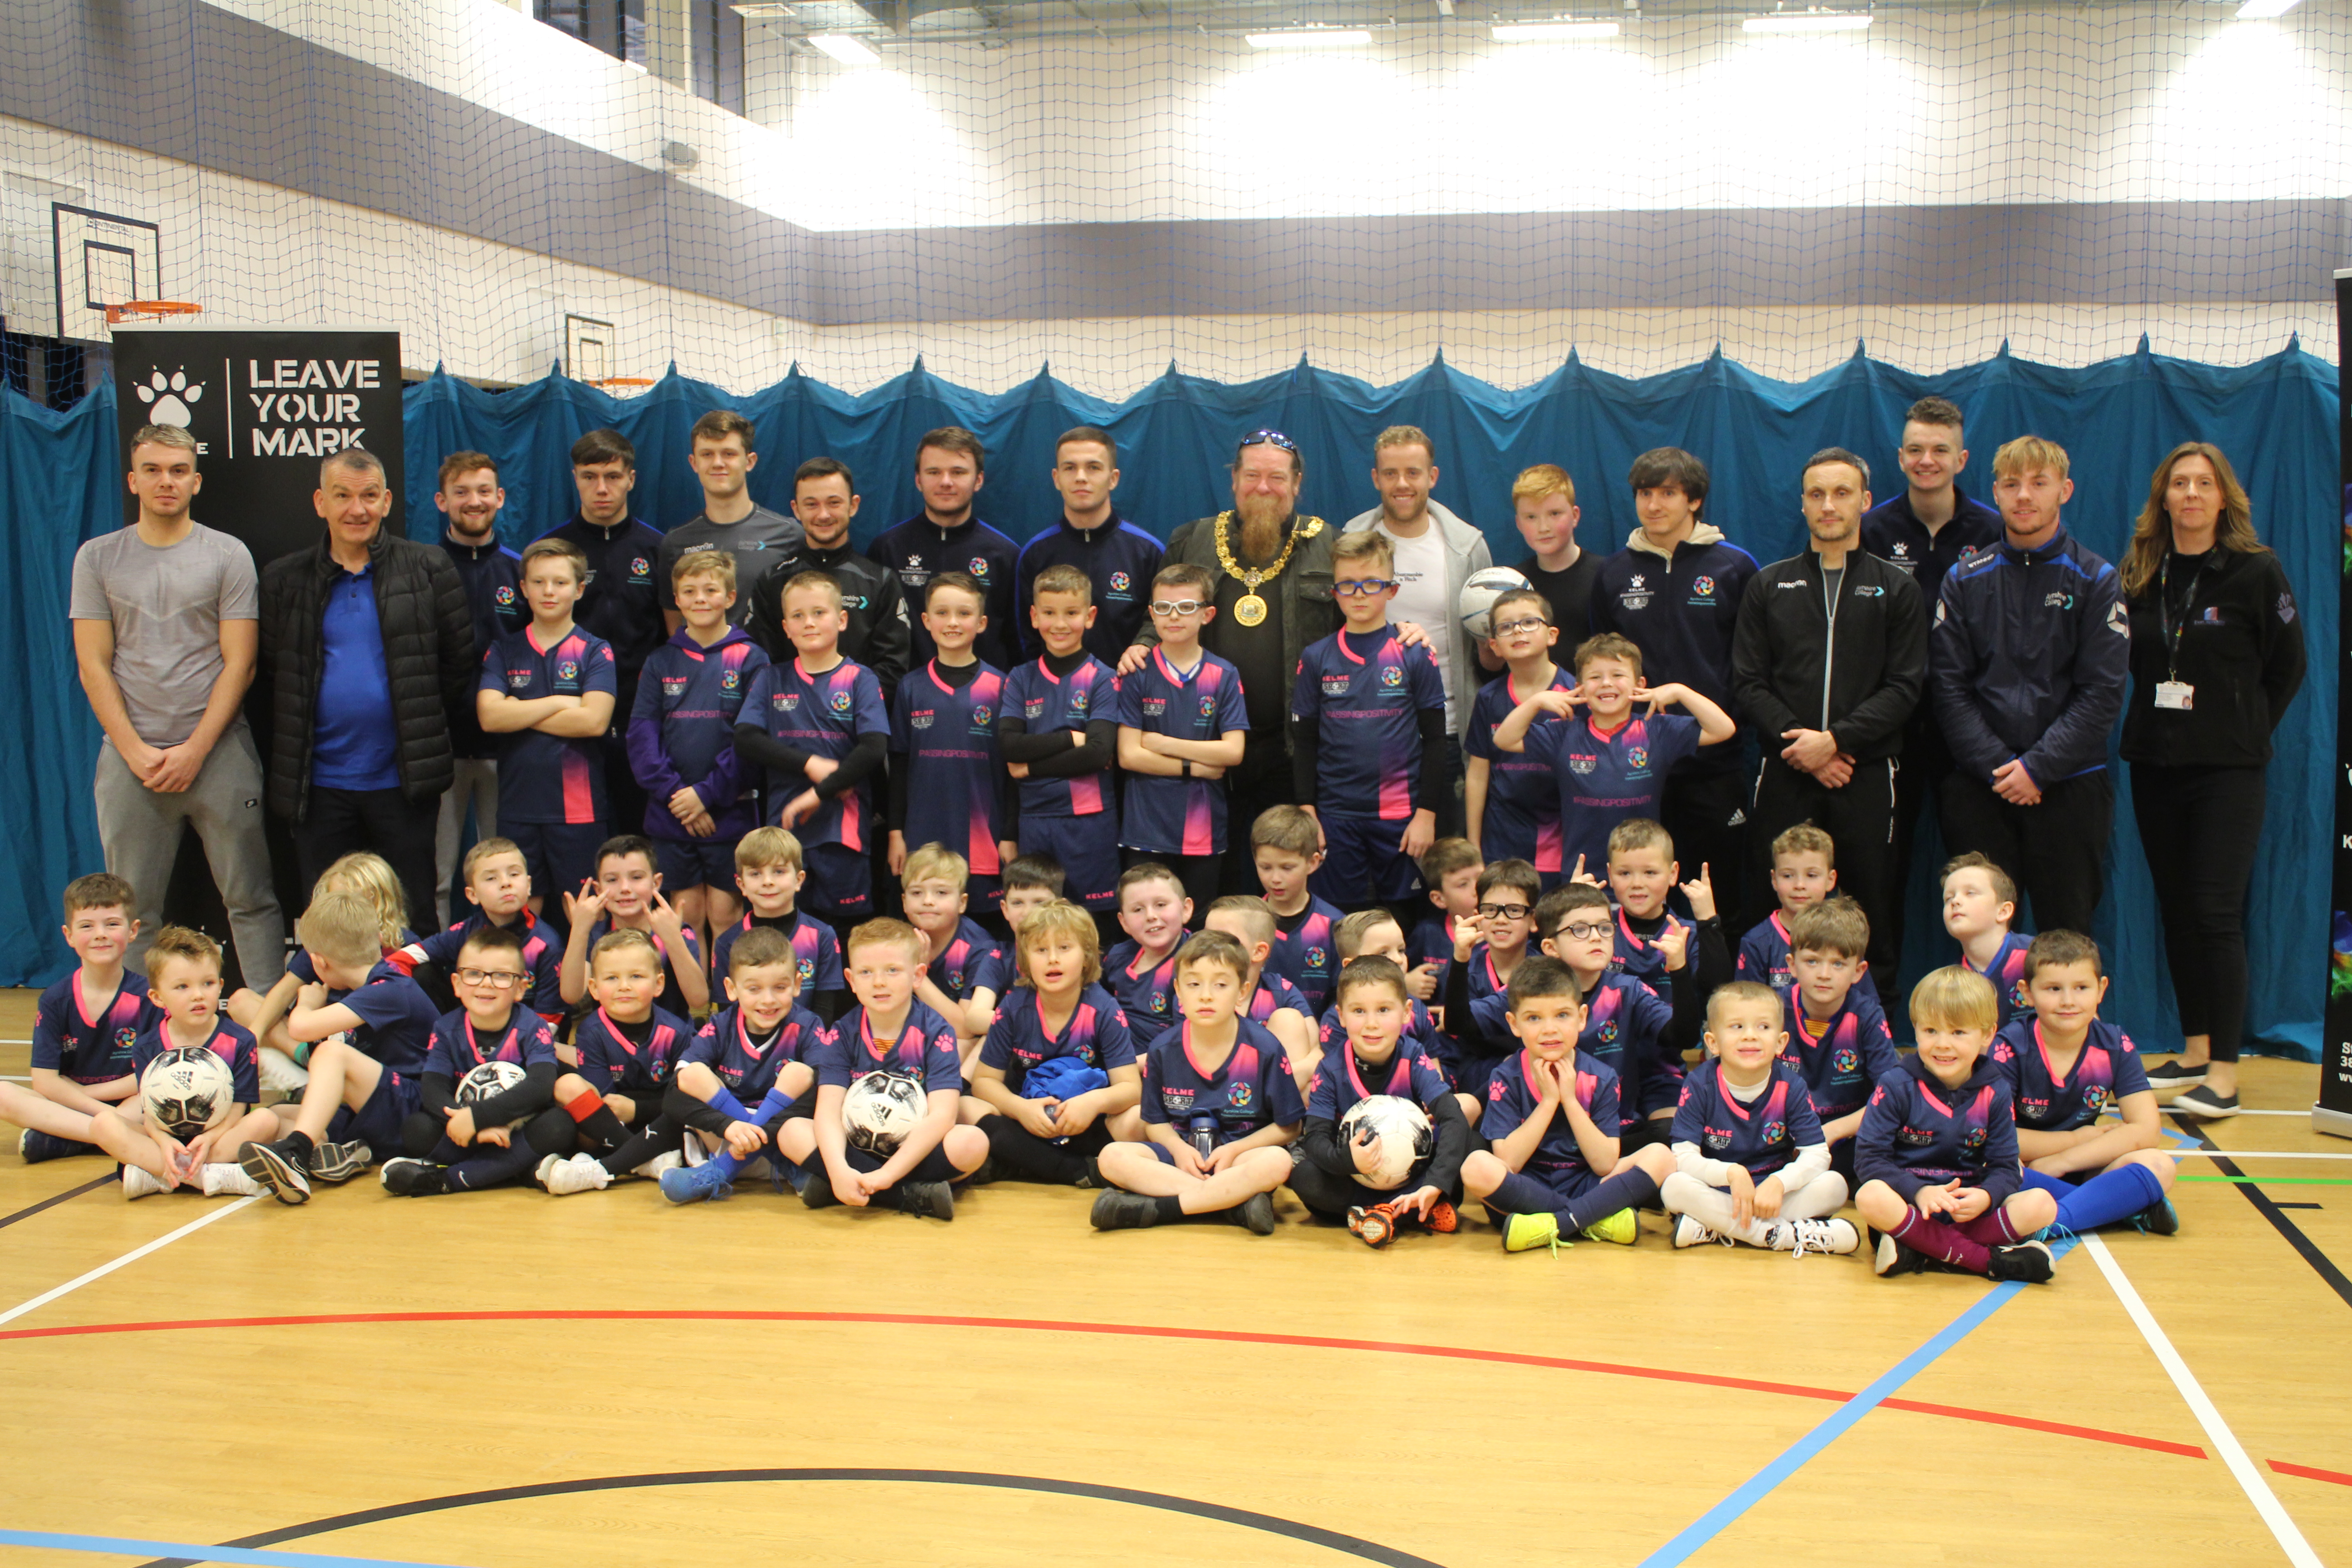 Surprise for participants of football clubs at Ayrshire College